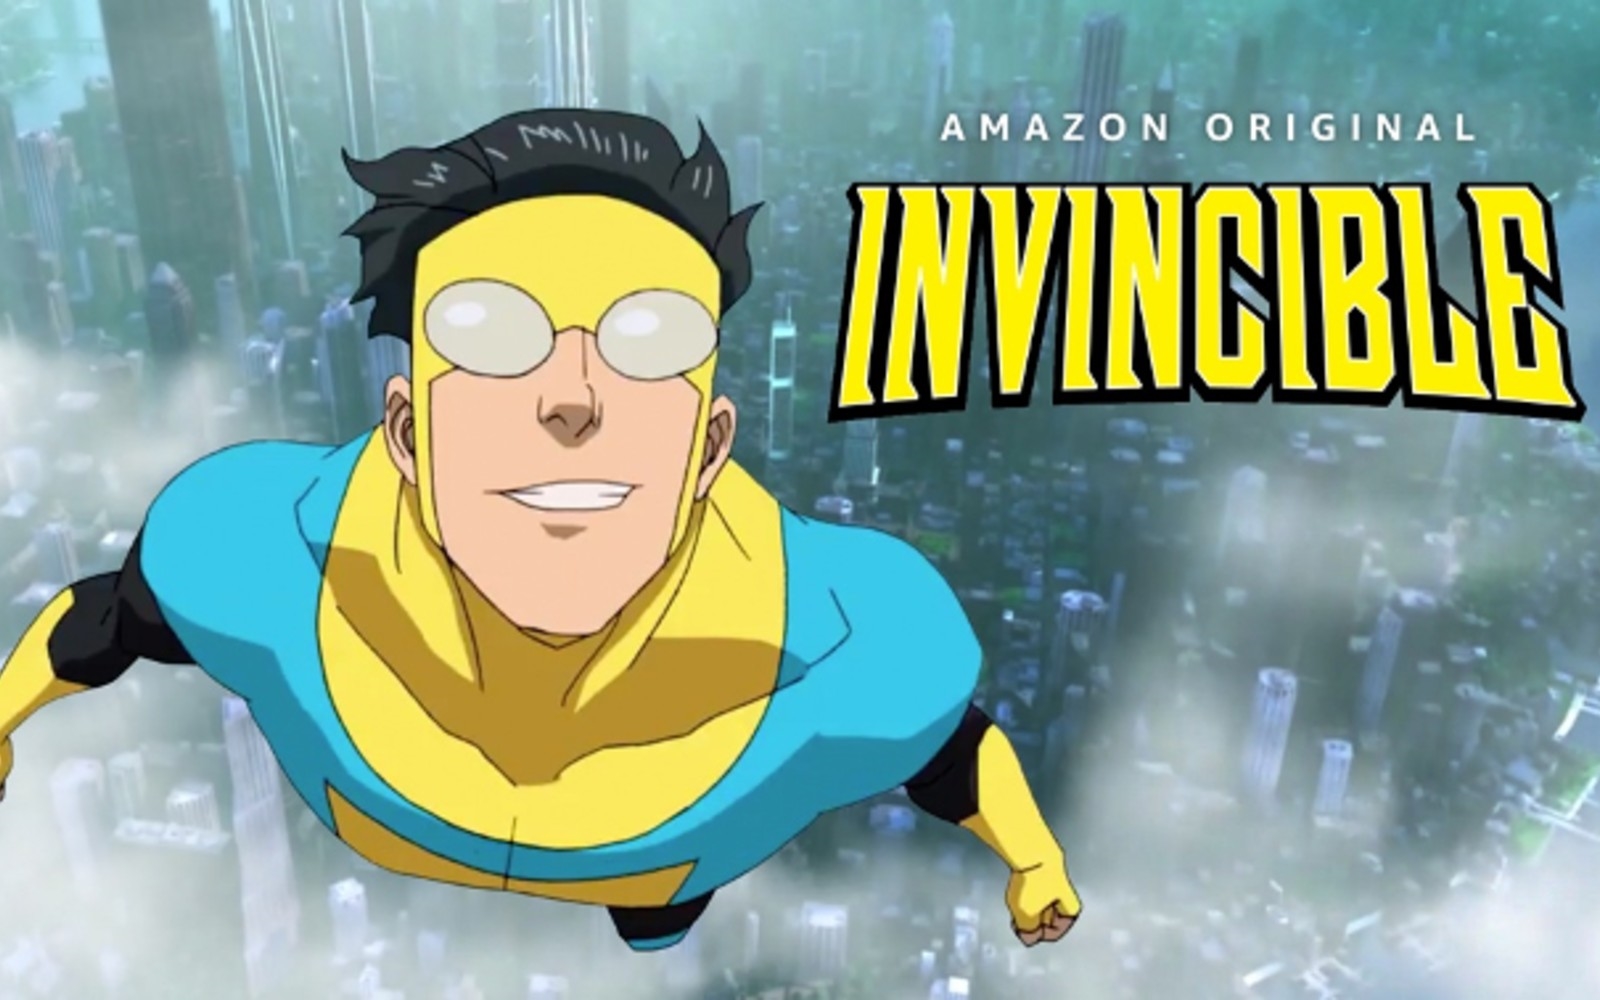 Amazon will start streaming Robert Kirkman's 'Invincible' on March 26th | DeviceDaily.com